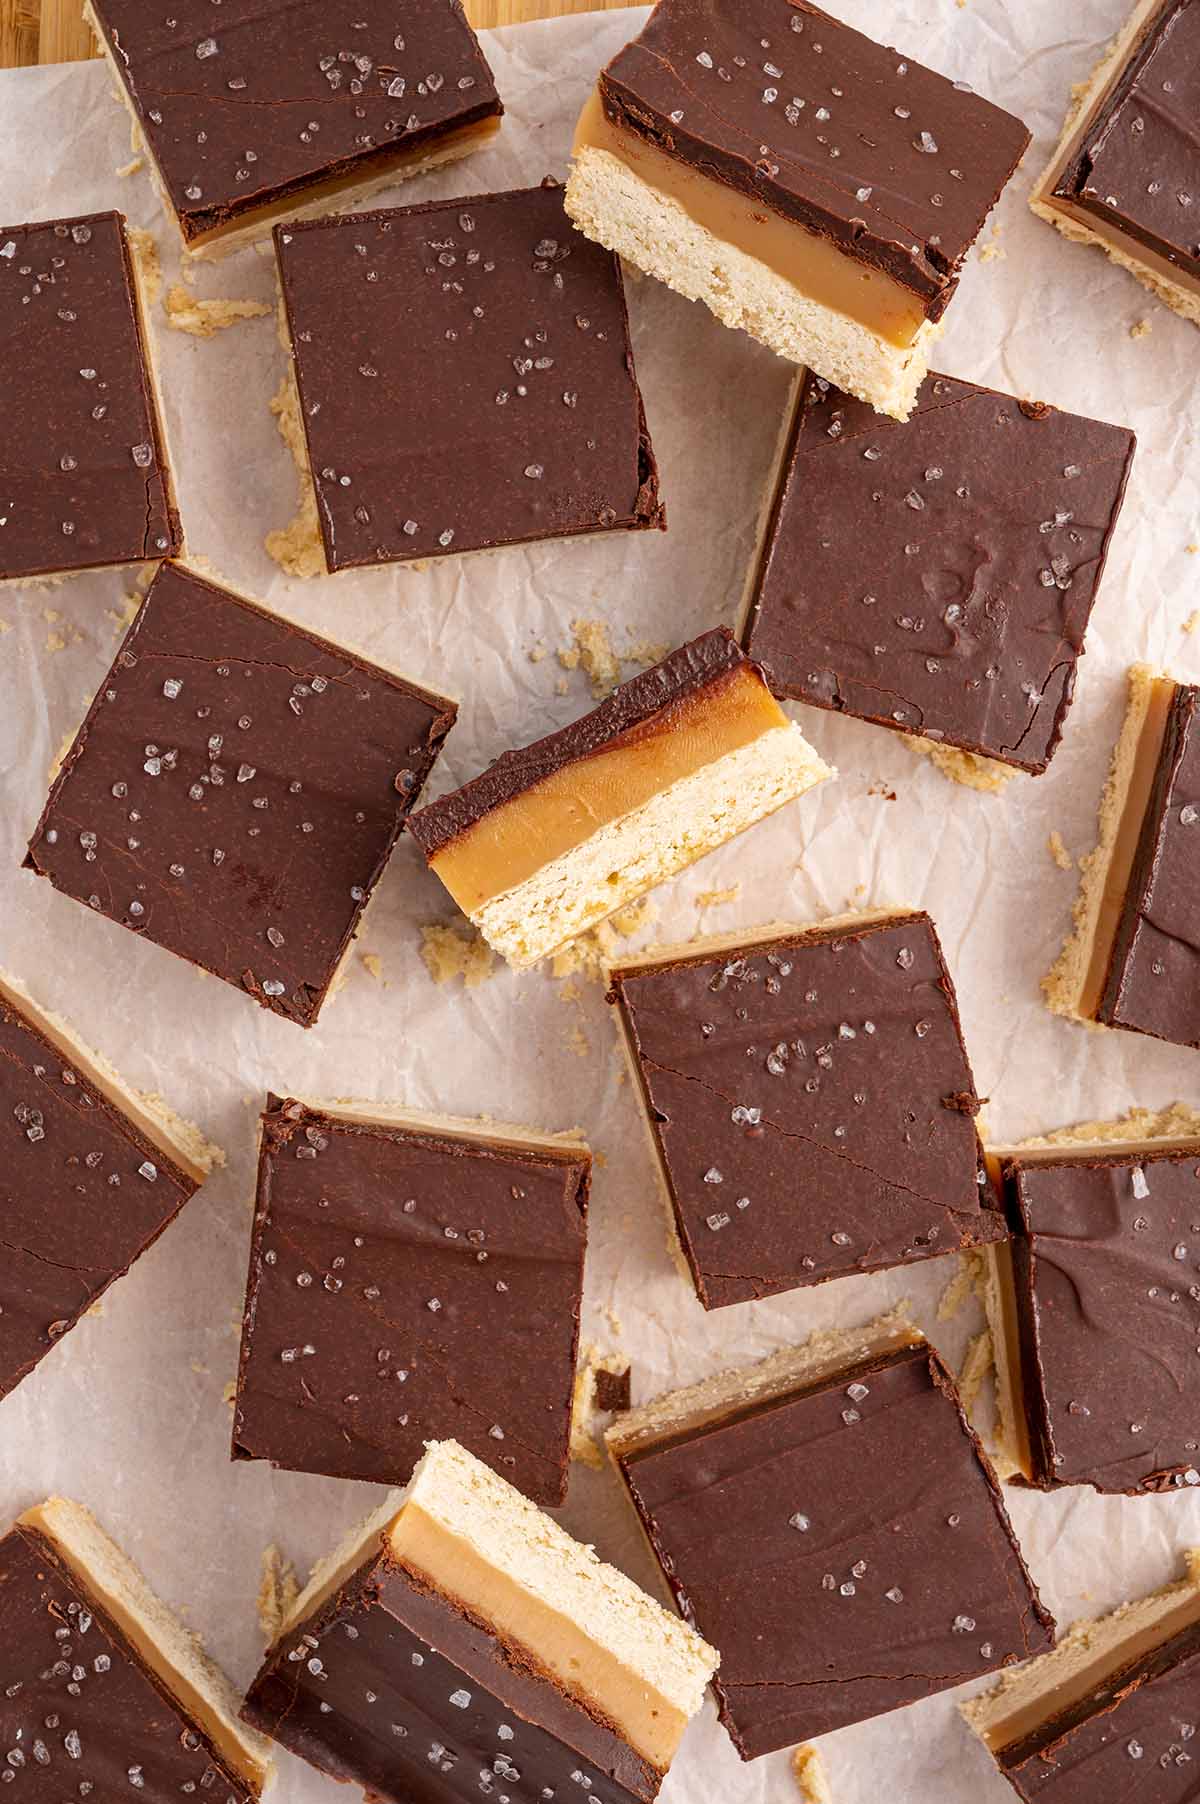 Millionaire Shortbread cut into squares and scattered around on top of parchment paper.